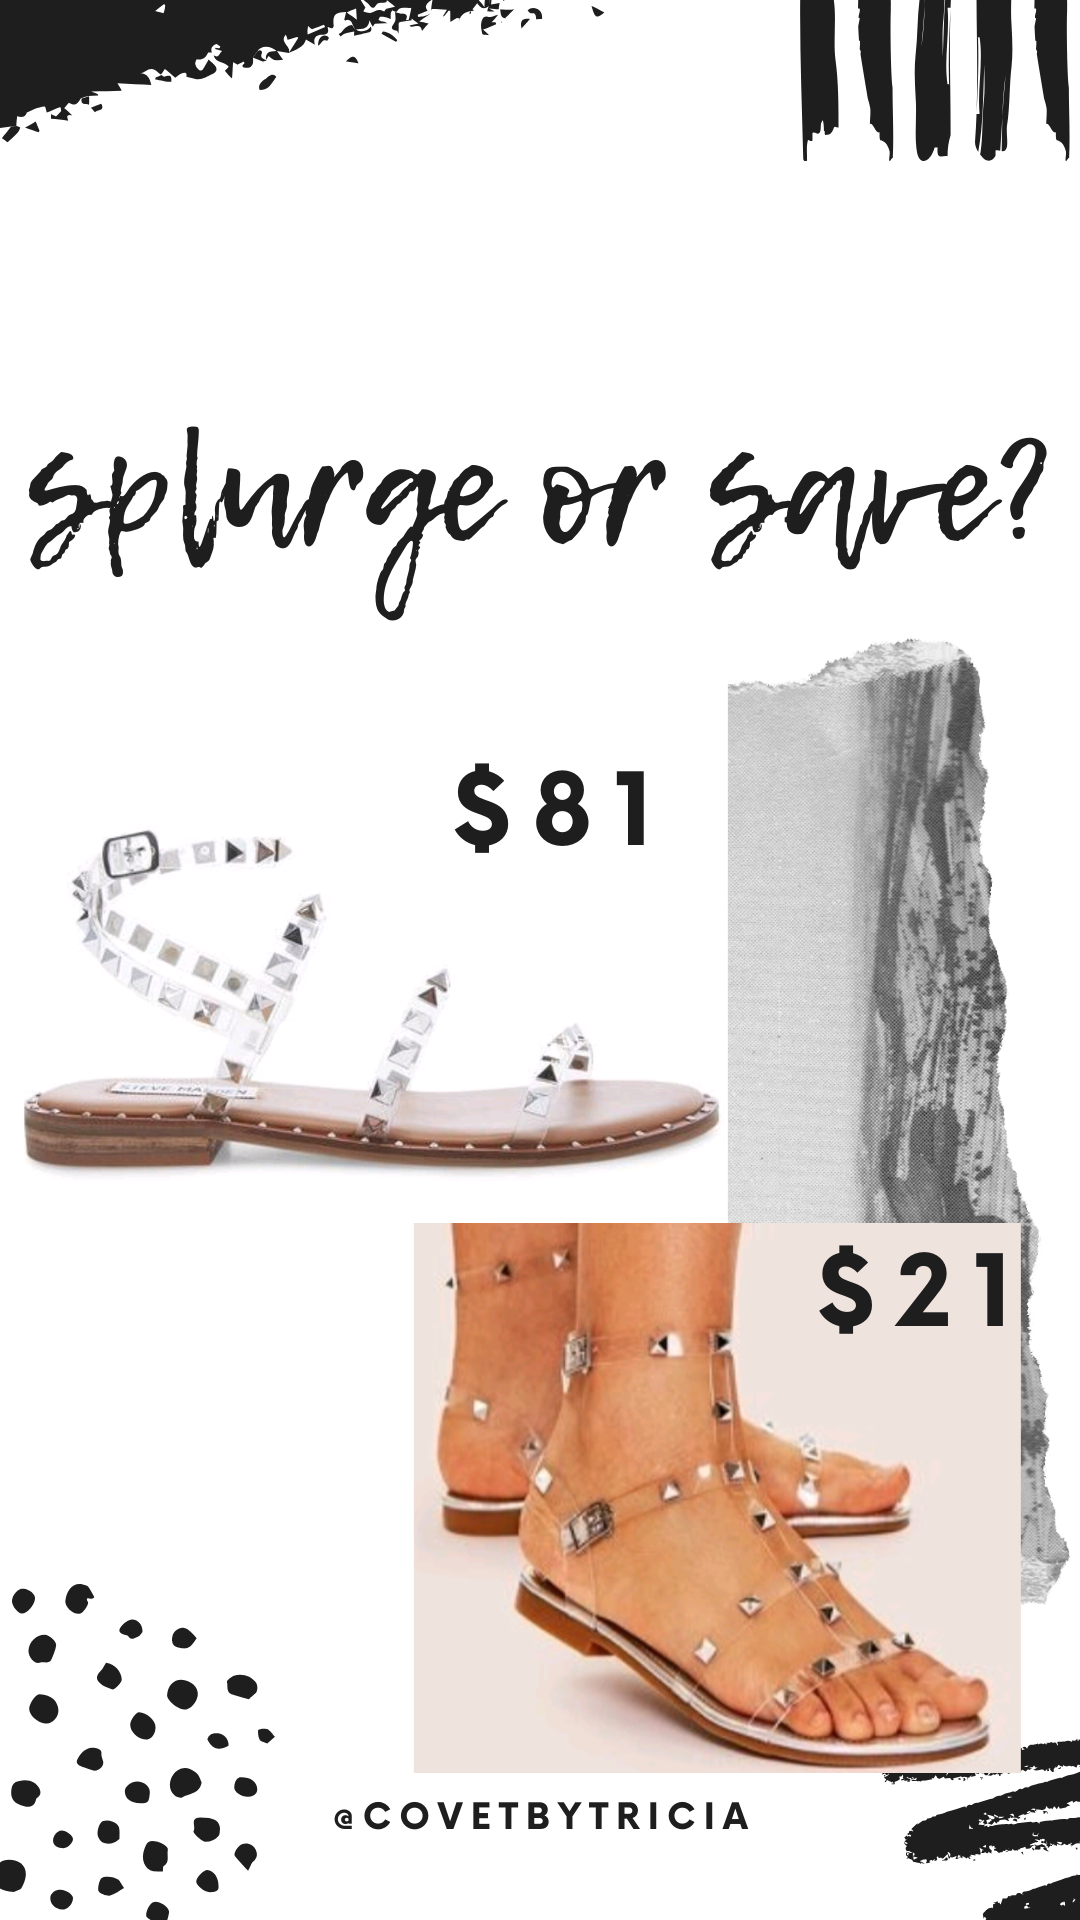 Best Studded Sandals for 2020 - We scoured the Internet for the best studded sandals in 2020! From the popular Steve Madden Travel Sandal to $10 dupe sandals, we have the perfect studded sandals for your style and budget. We're sharing the best clear studded sandals and the best nude studded sandals in this in-depth post! #sandals #summer2020 #shoes 